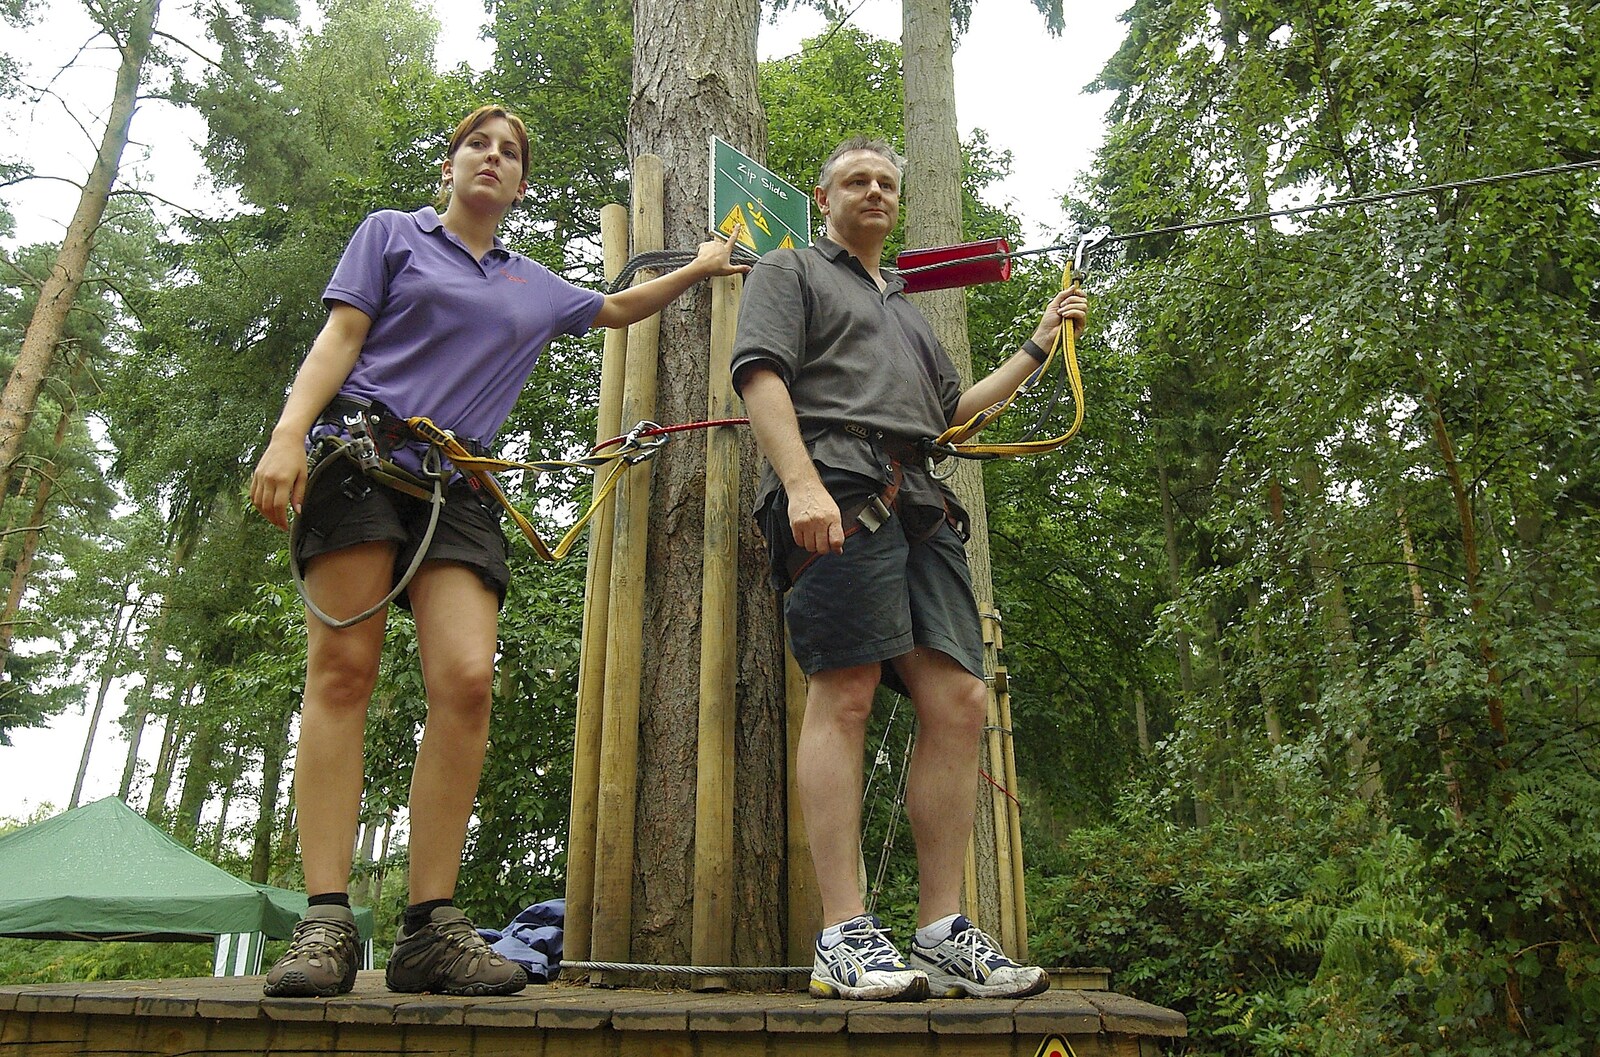 Dave and a trainer from Qualcomm Cambridge "Go Ape", High Lodge, Thetford Forest - 27th July 2006